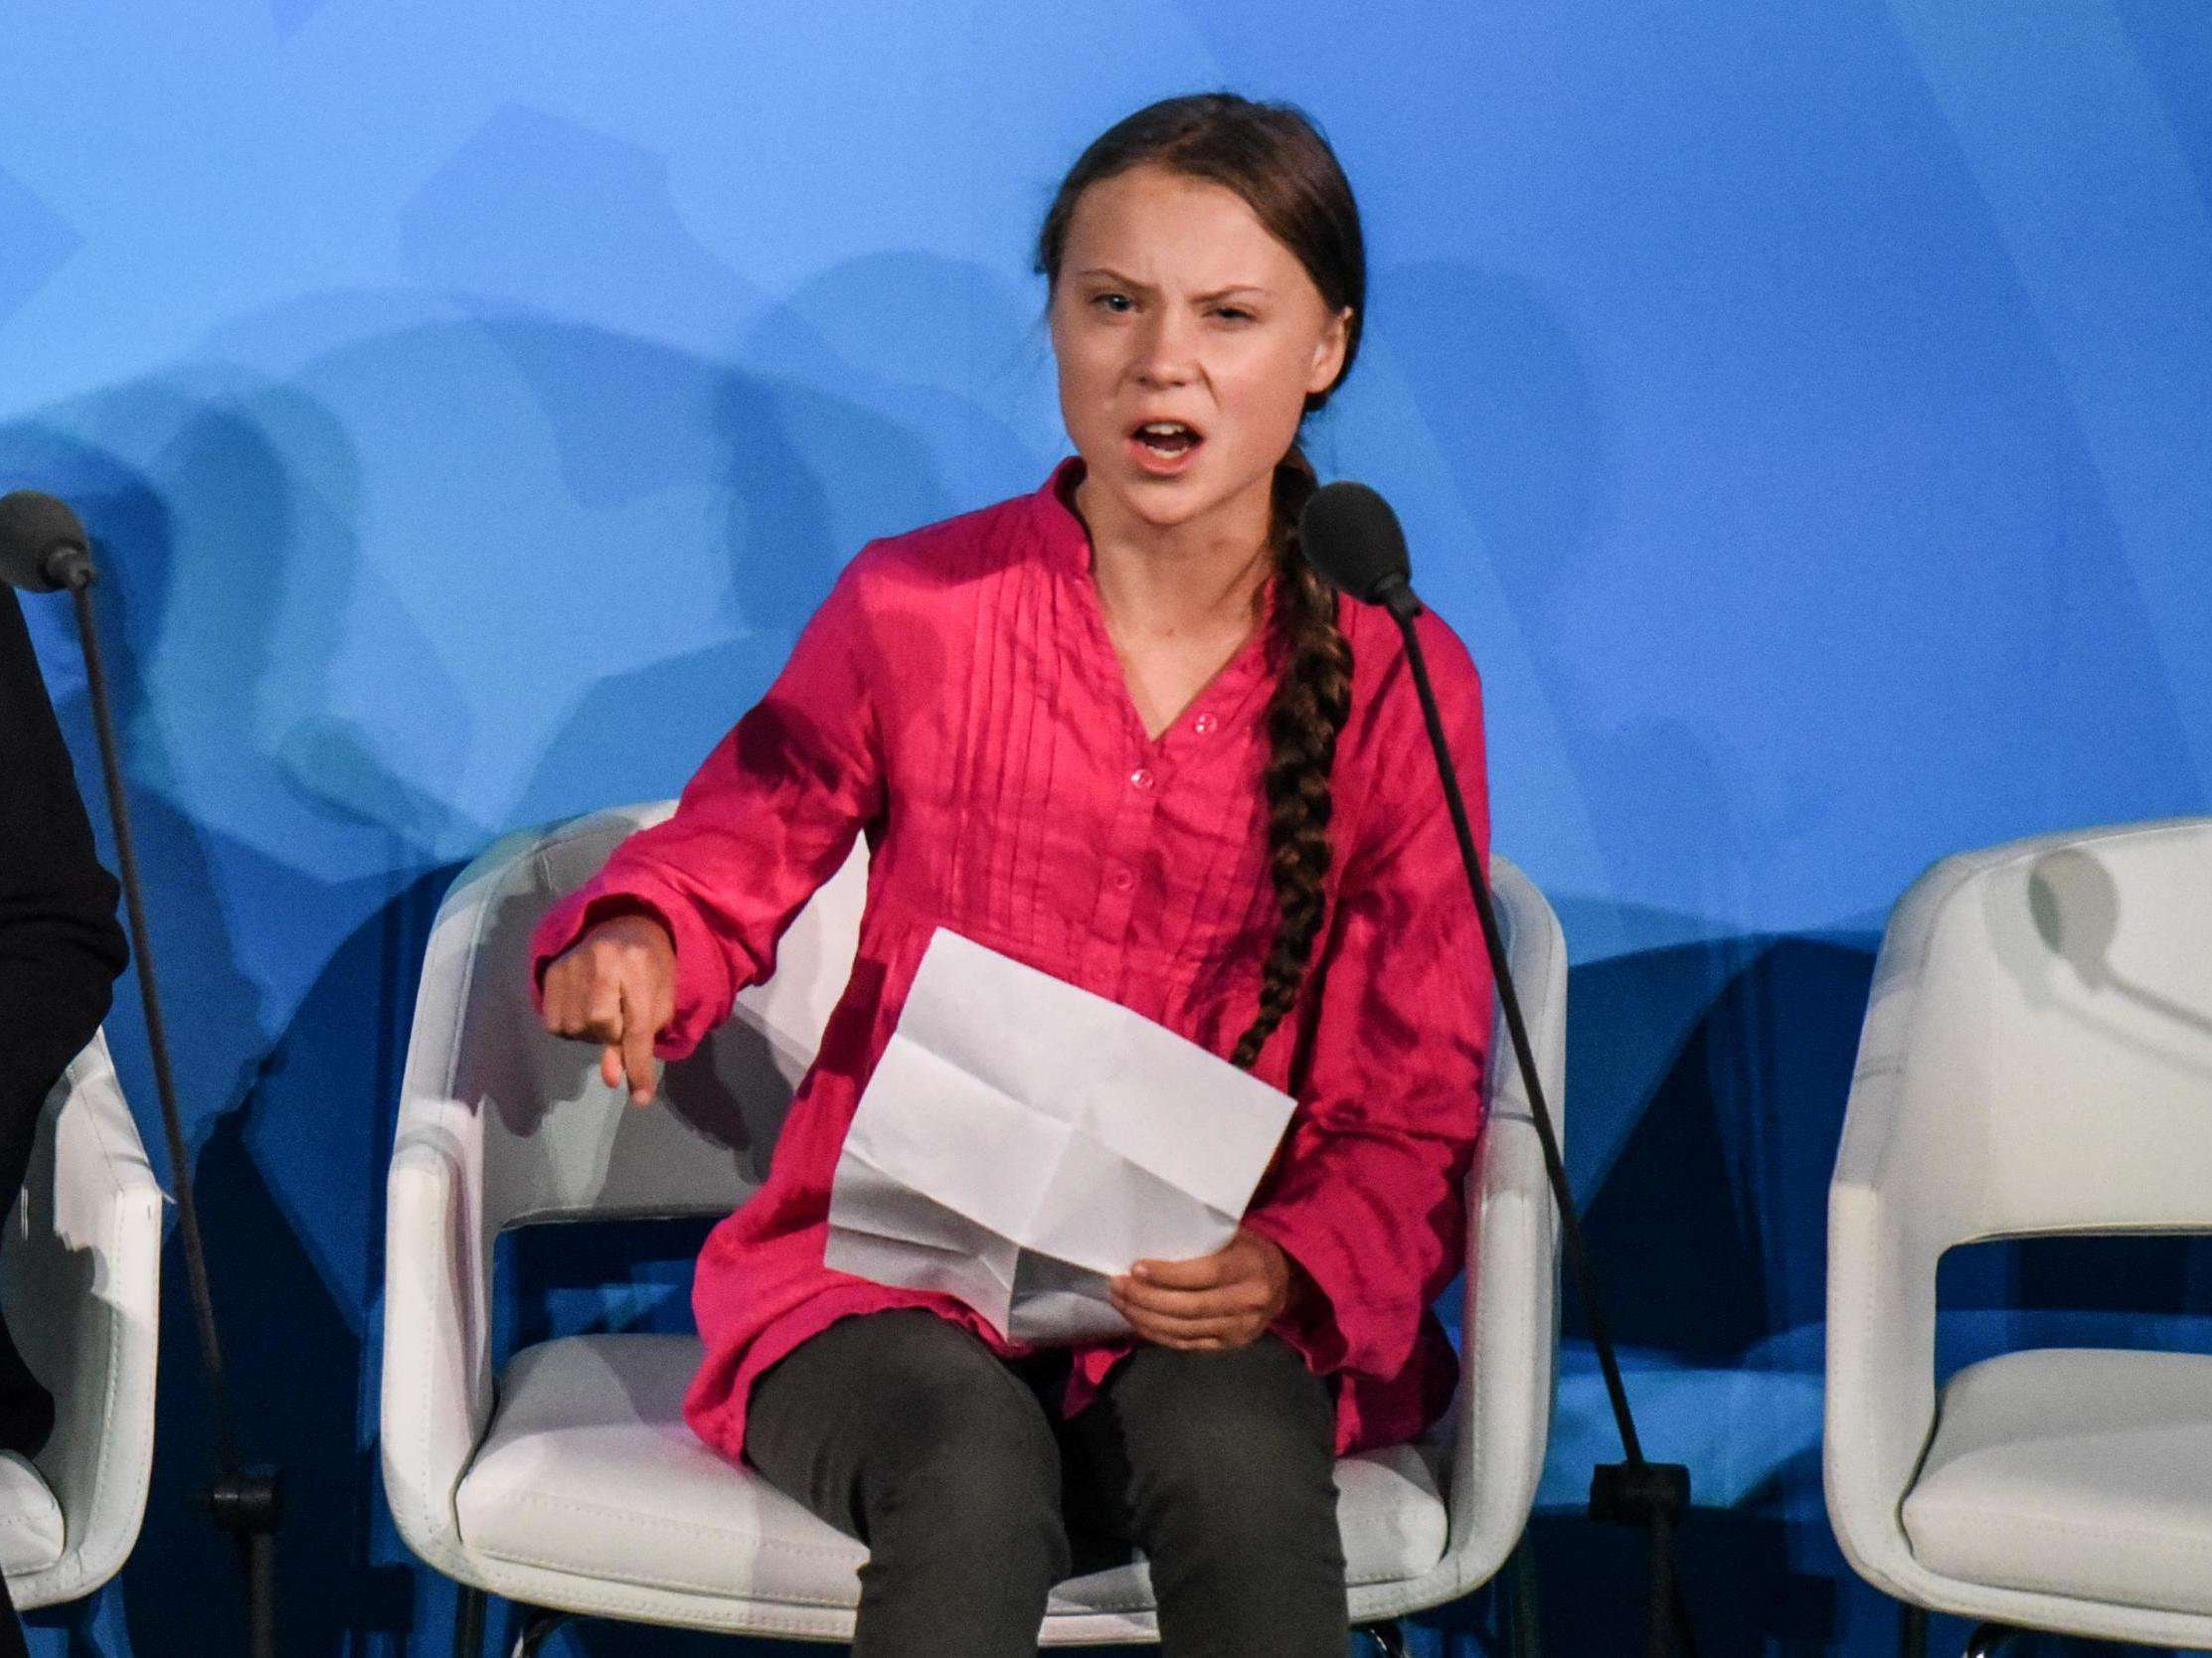 image for Greta Thunberg says adults who attack her 'must feel threatened'